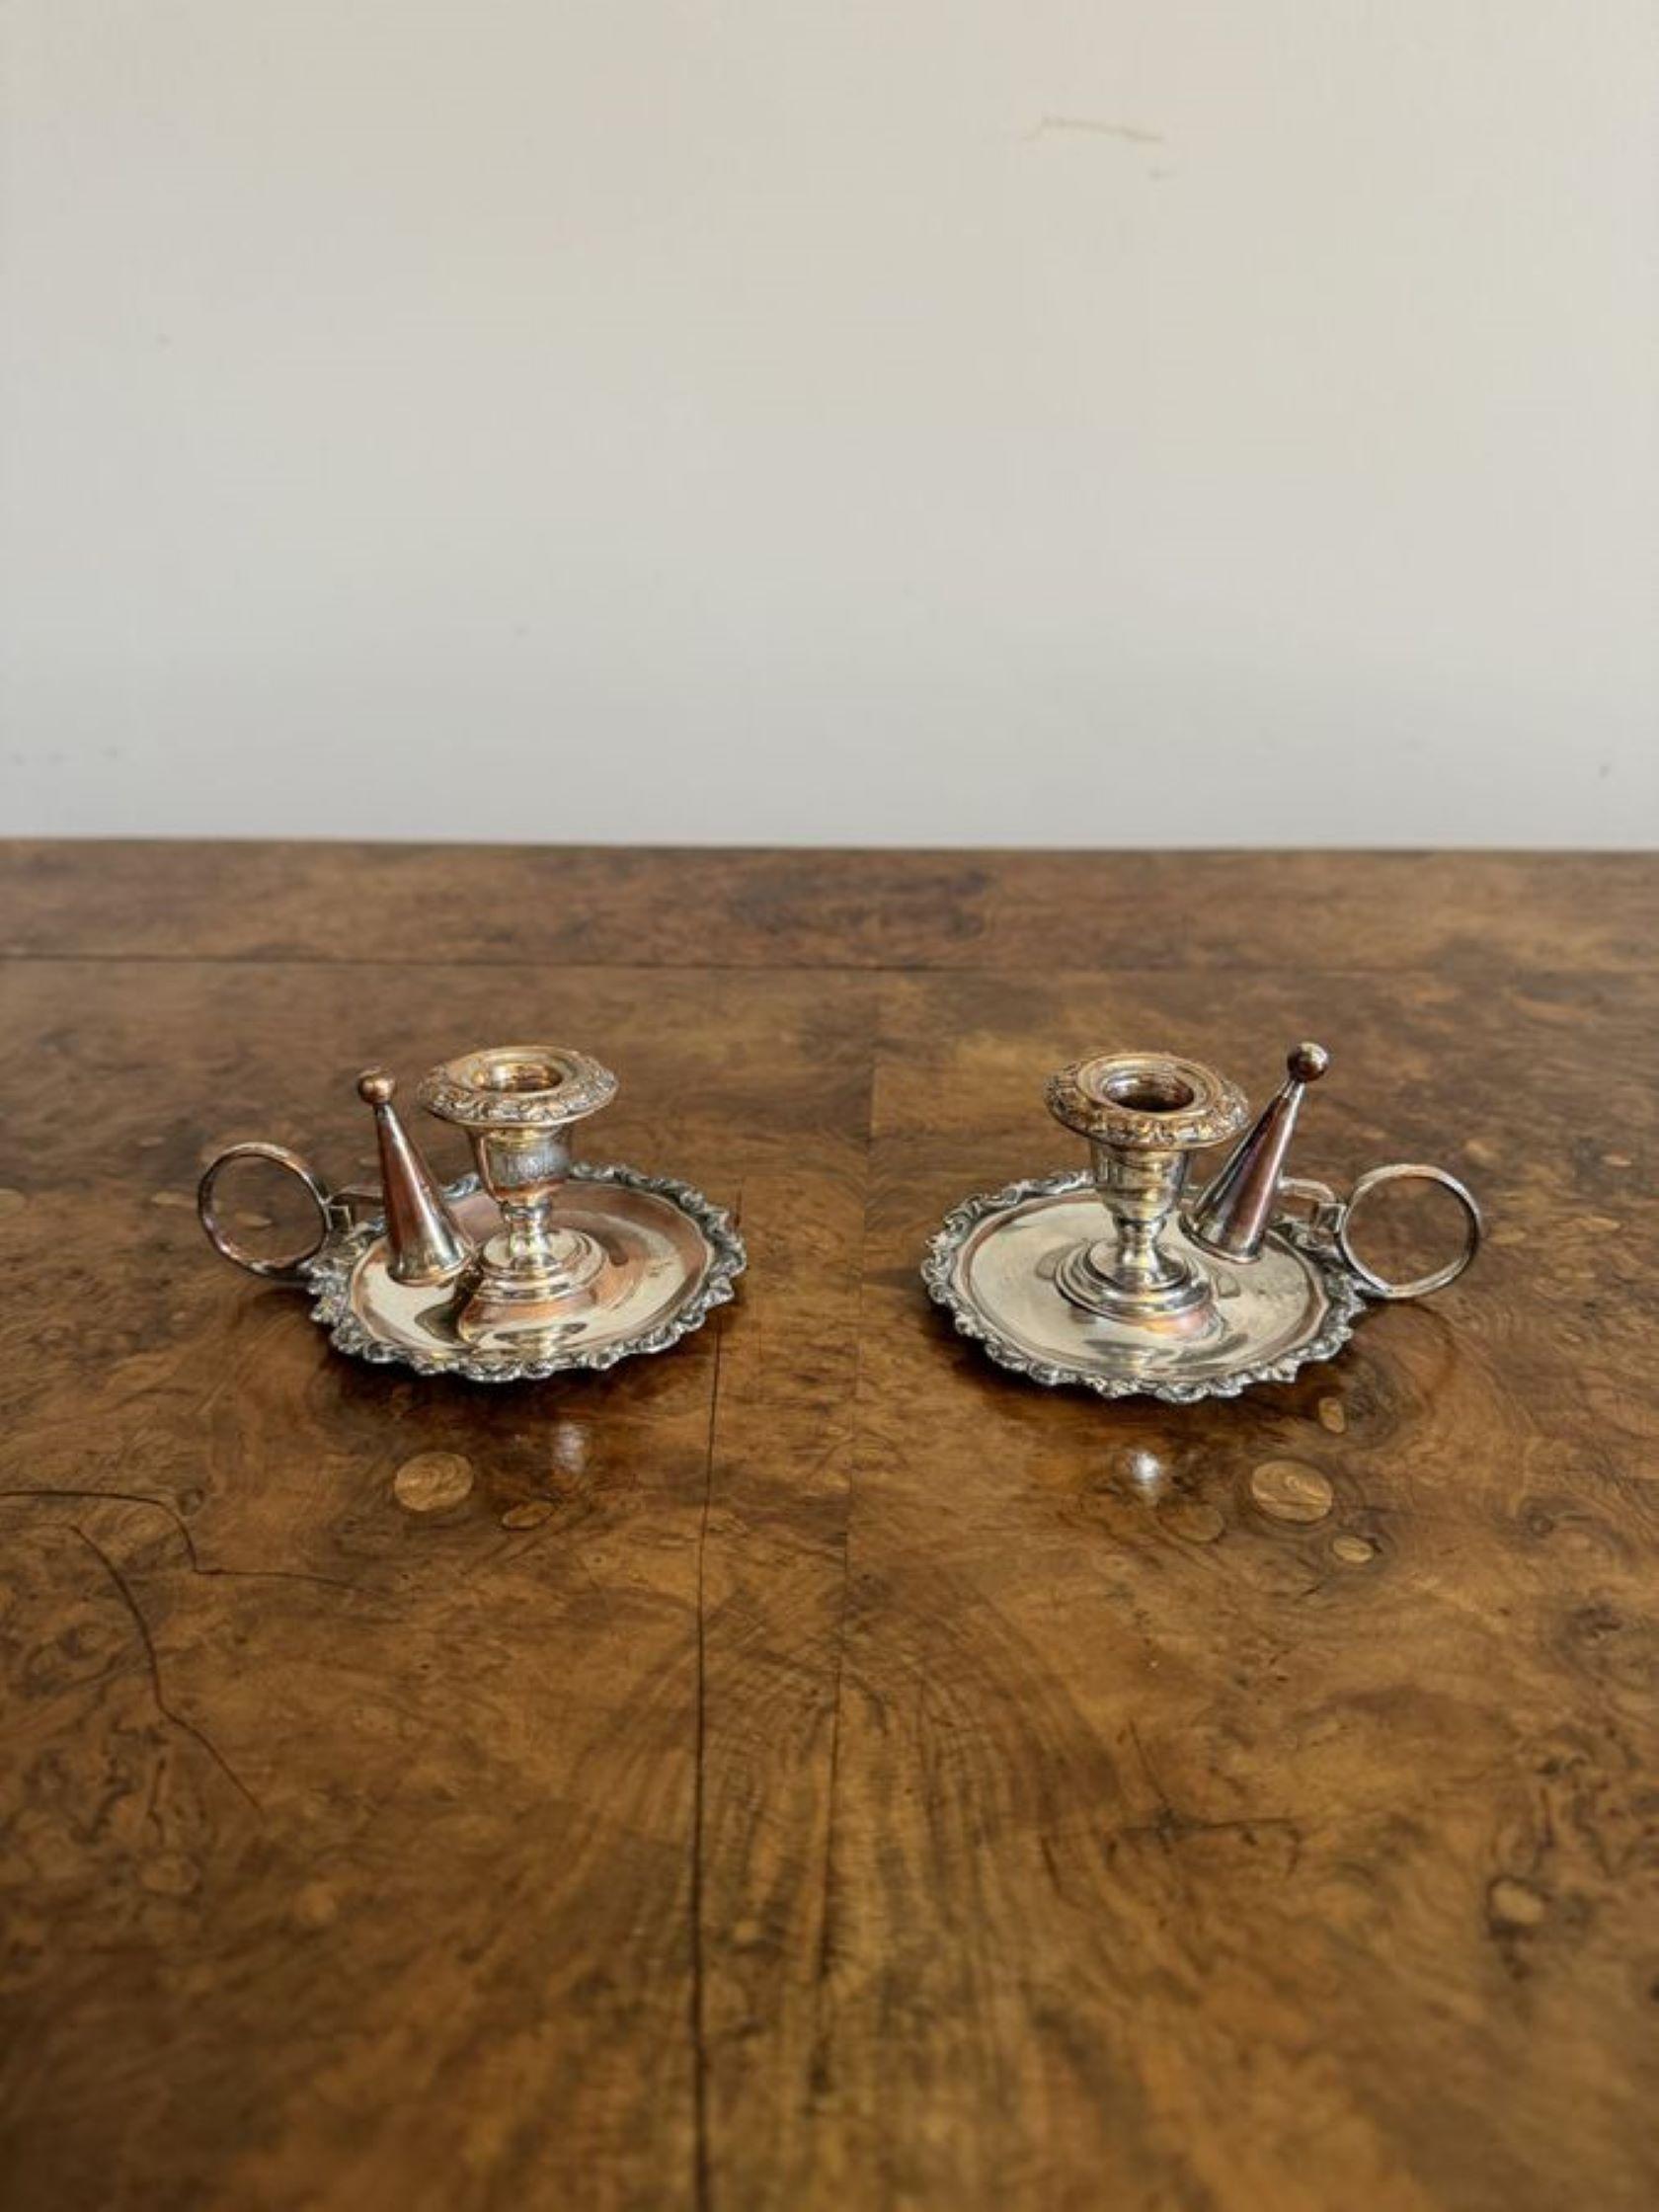 Lovely pair of antique George III silver plated chamber sticks having a quality pair of George III silver plated chamber sticks with an ornate shaped edge, the original snuffers and a circular shaped handle to the back.

D. 1800 